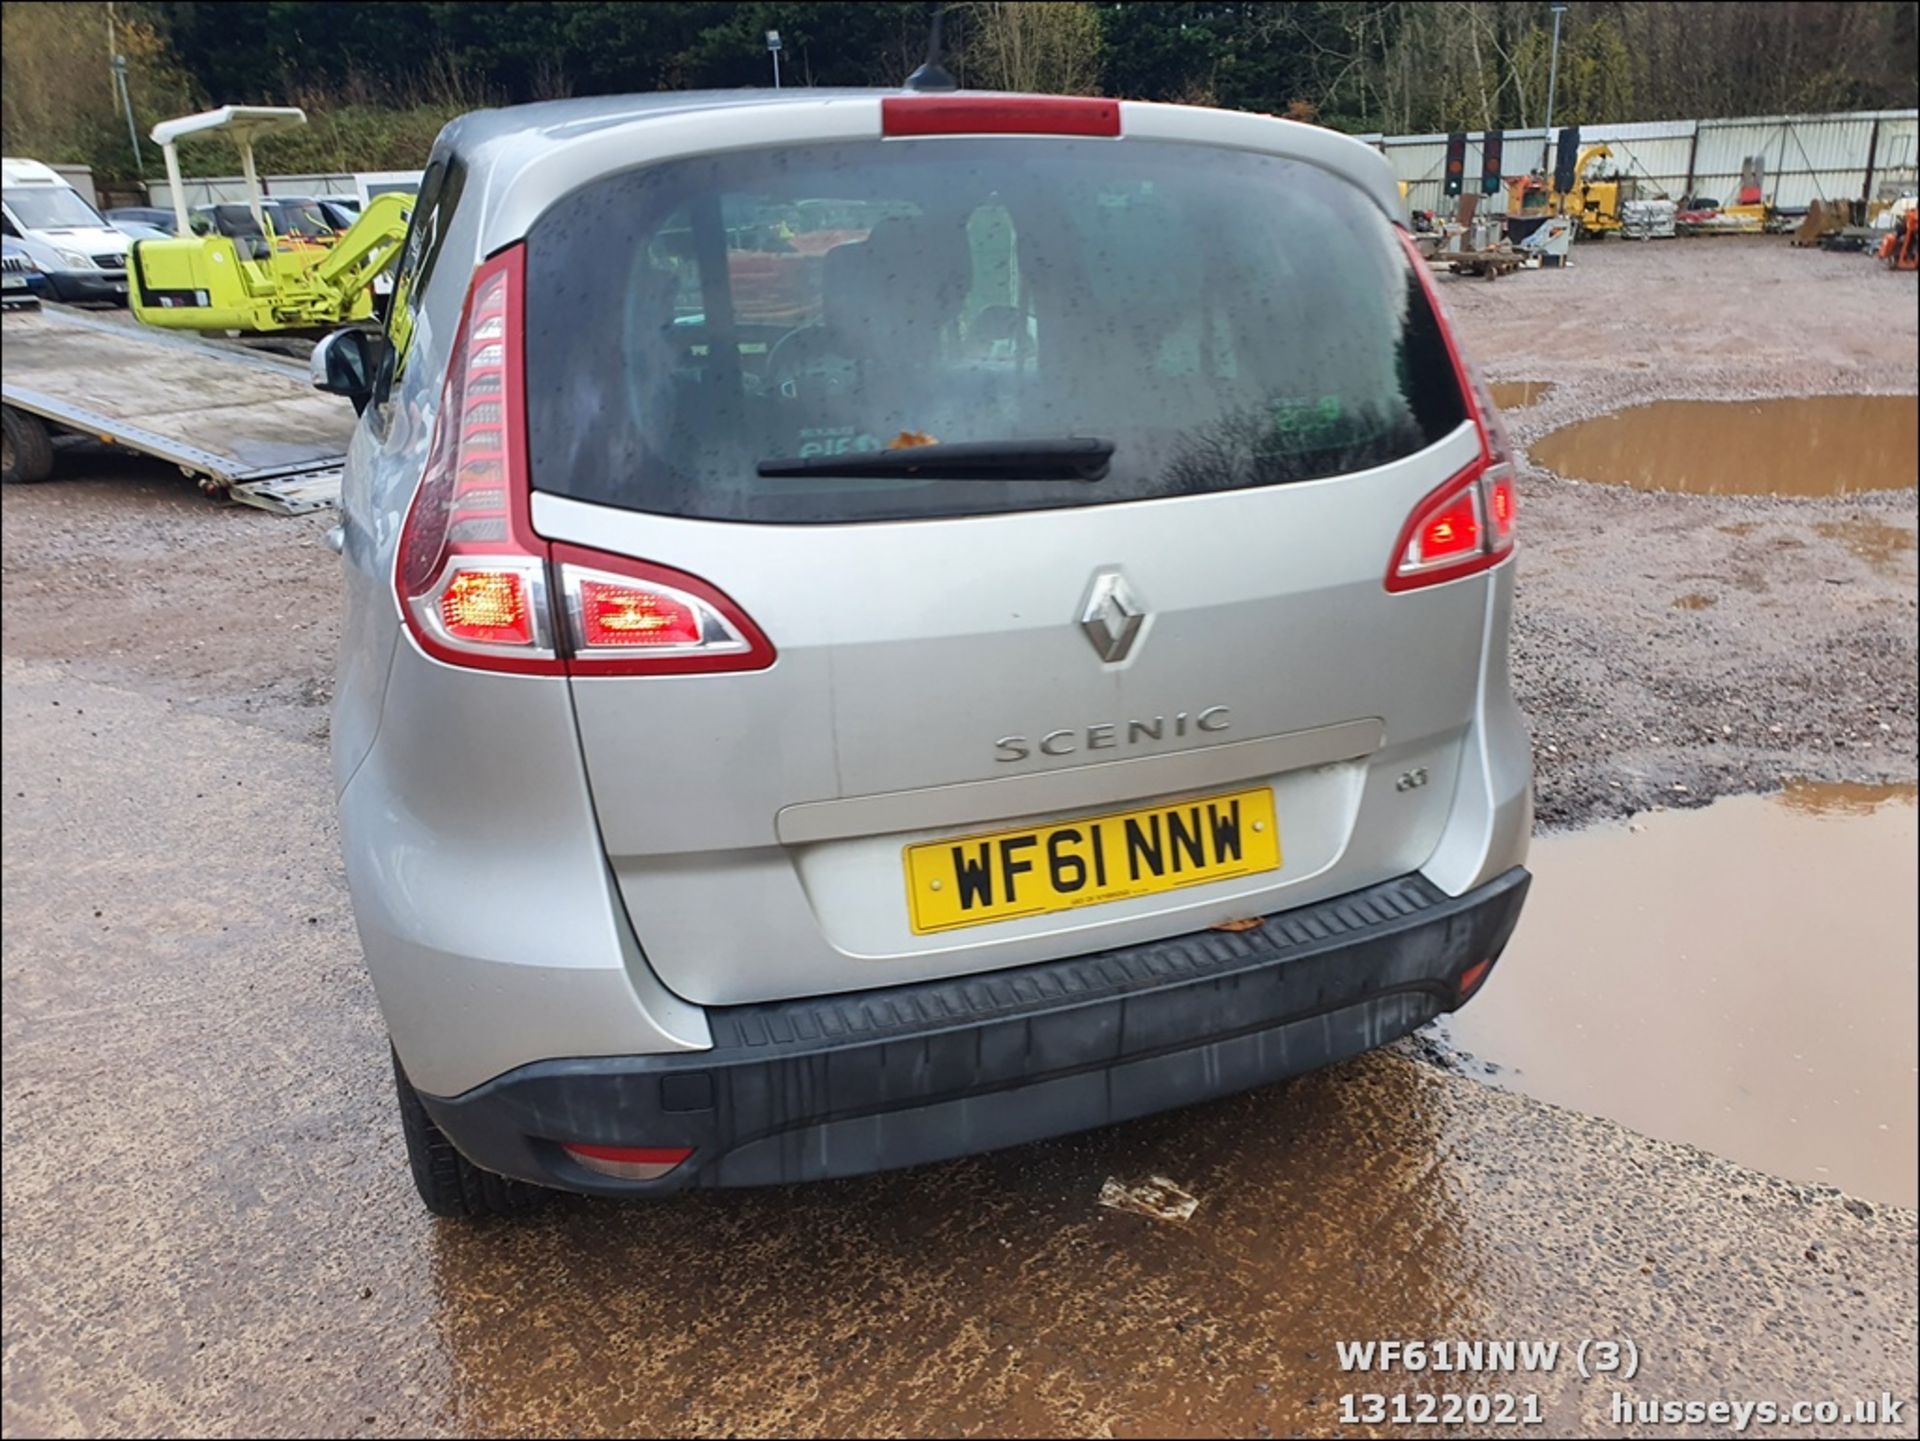 11/61 RENAULT SCENIC DYNAMIQUE TOMTOM D - 1461cc 5dr MPV (Silver, 93k) - Image 4 of 37